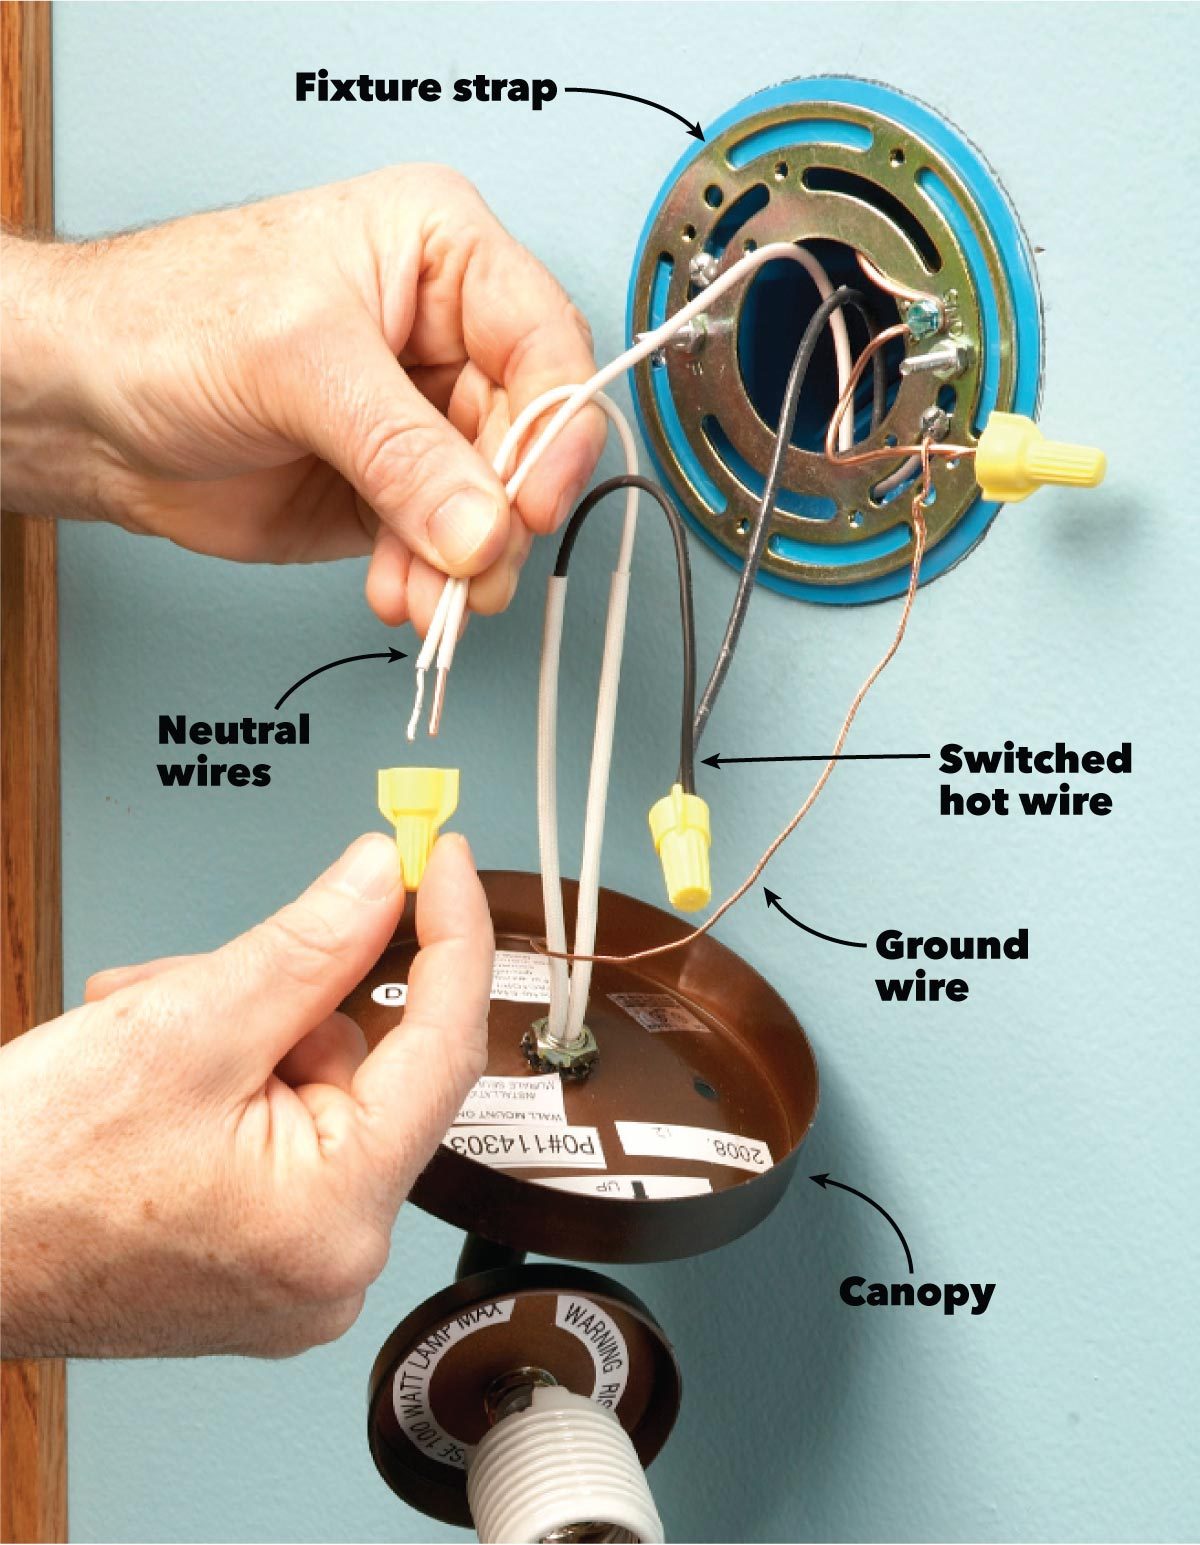 Wiring A Light Fixture With 4 Wires | MyCoffeepot.Org